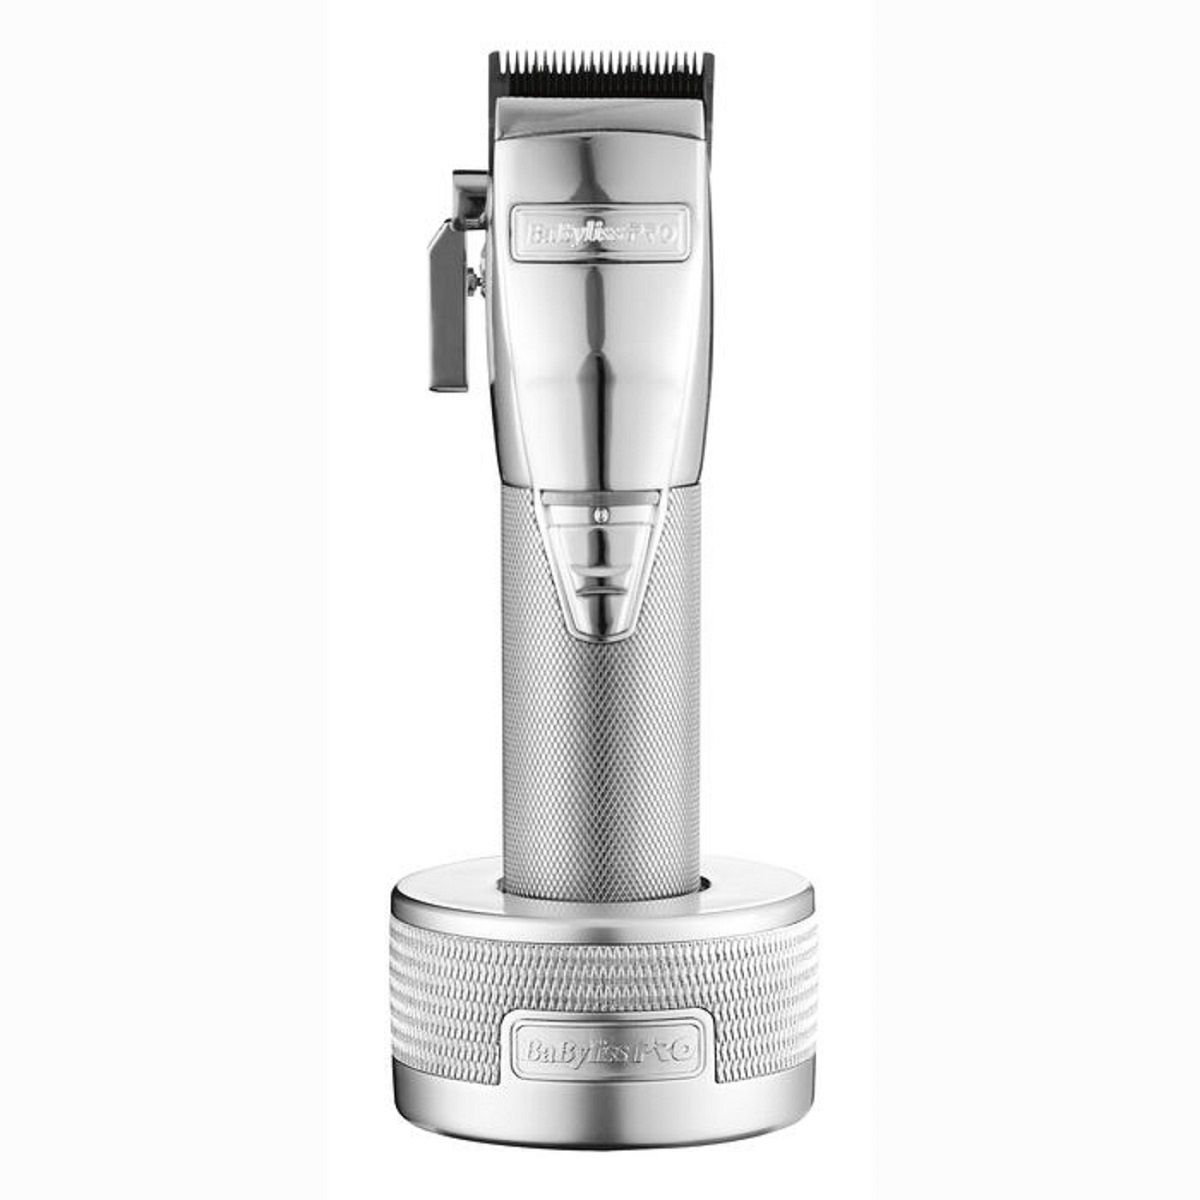 BABYLISS FX CHARGING BASE CLIPPER - SILVER